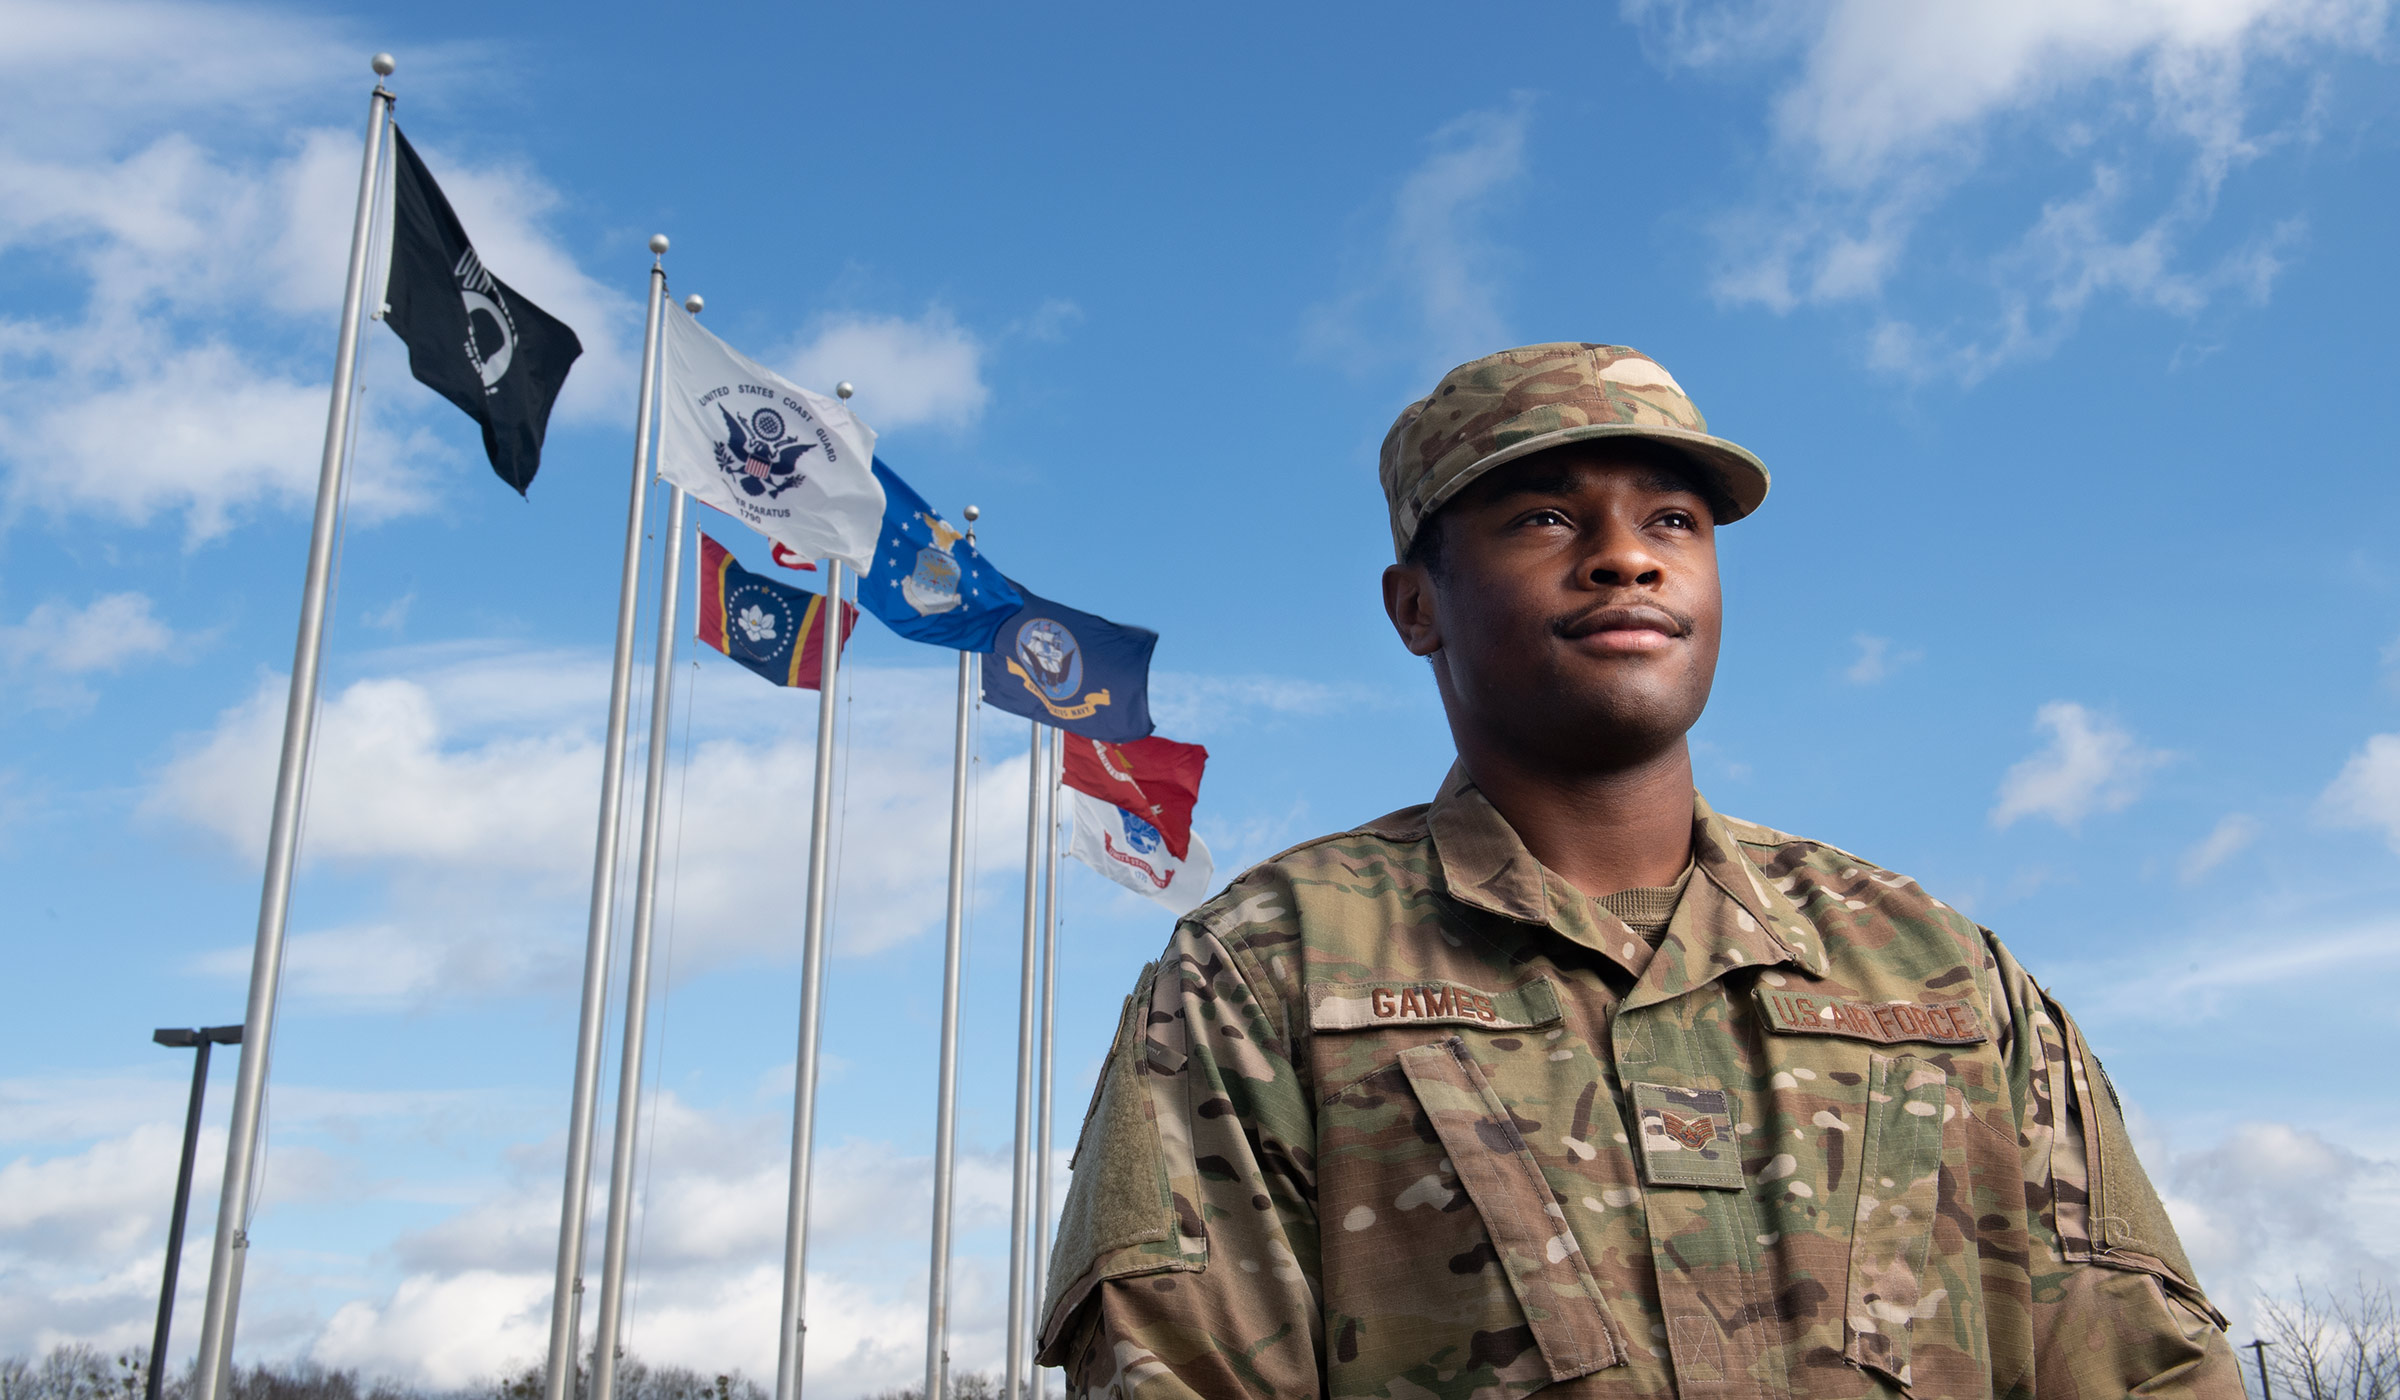 Patrick Games, pictured in his Air Force uniform in front of U.S. military flags.